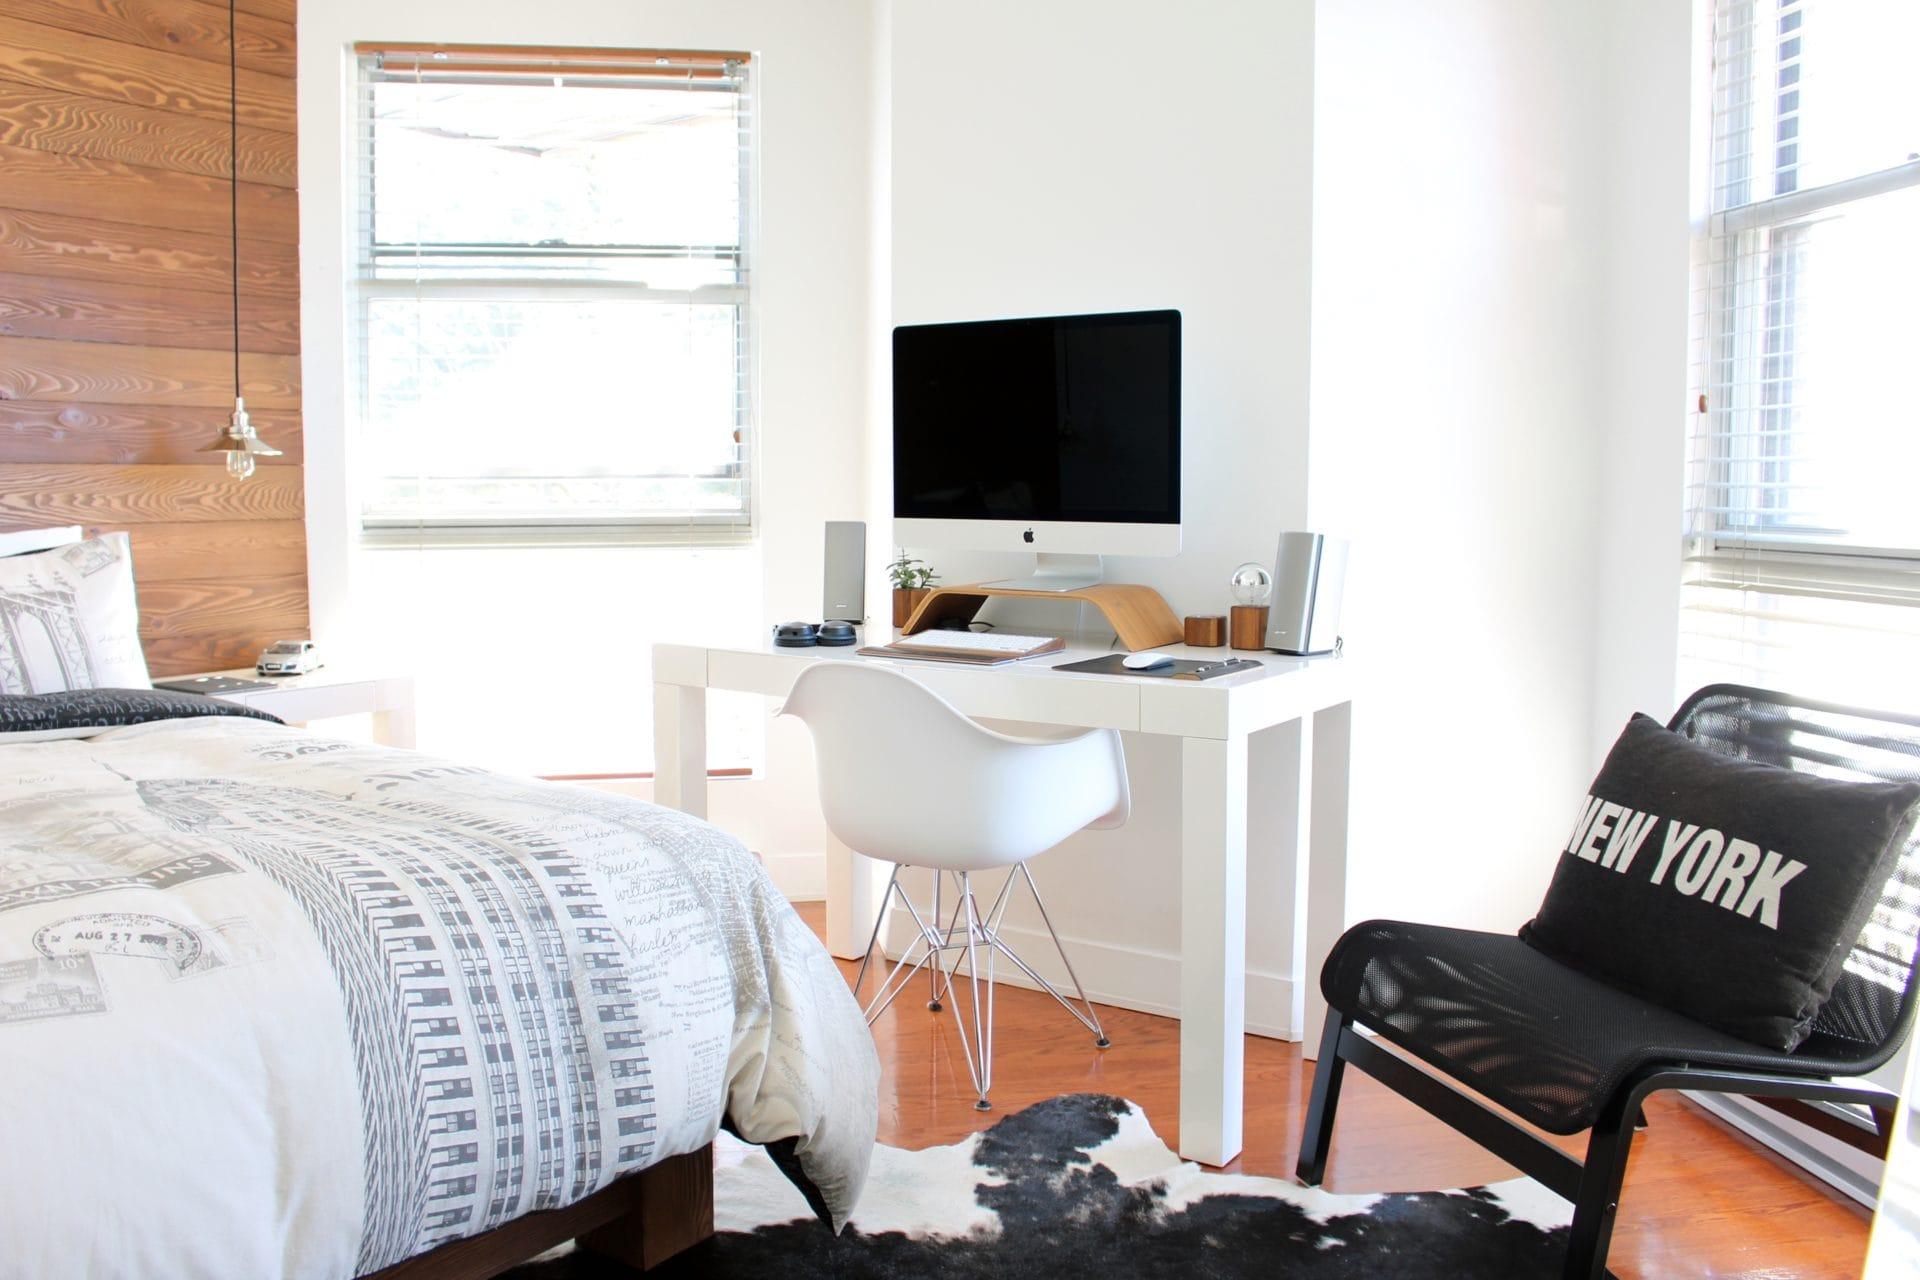 Best Classic 6 apartment for students in Brooklyn